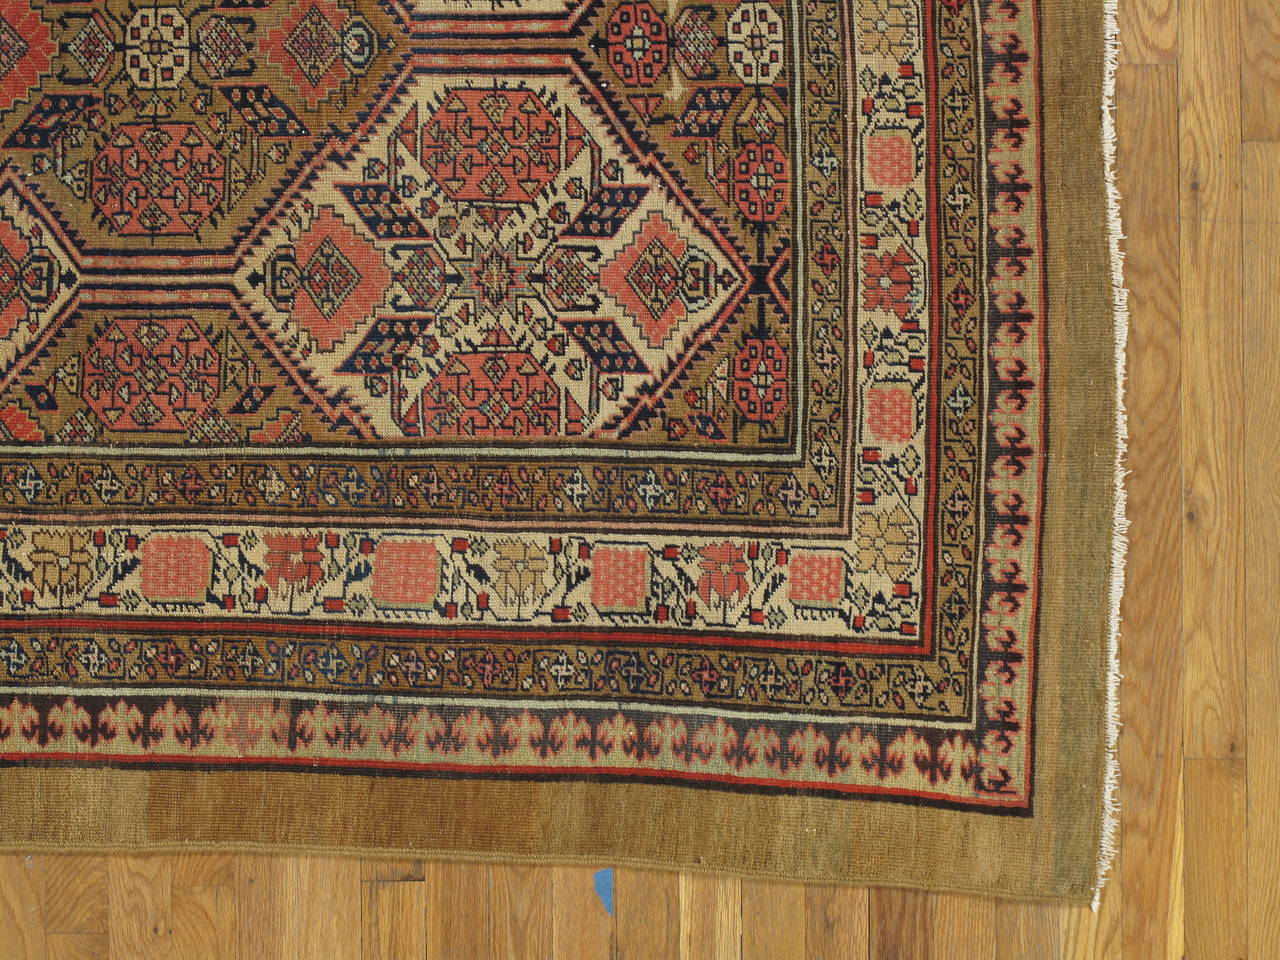 The village of Serab is known for their Fine long runners with a characteristic camel ground and lozenge shaped medallions. These rugs are woven in the village of Serab, located in the North West Region of Persia.
Size: 6.3